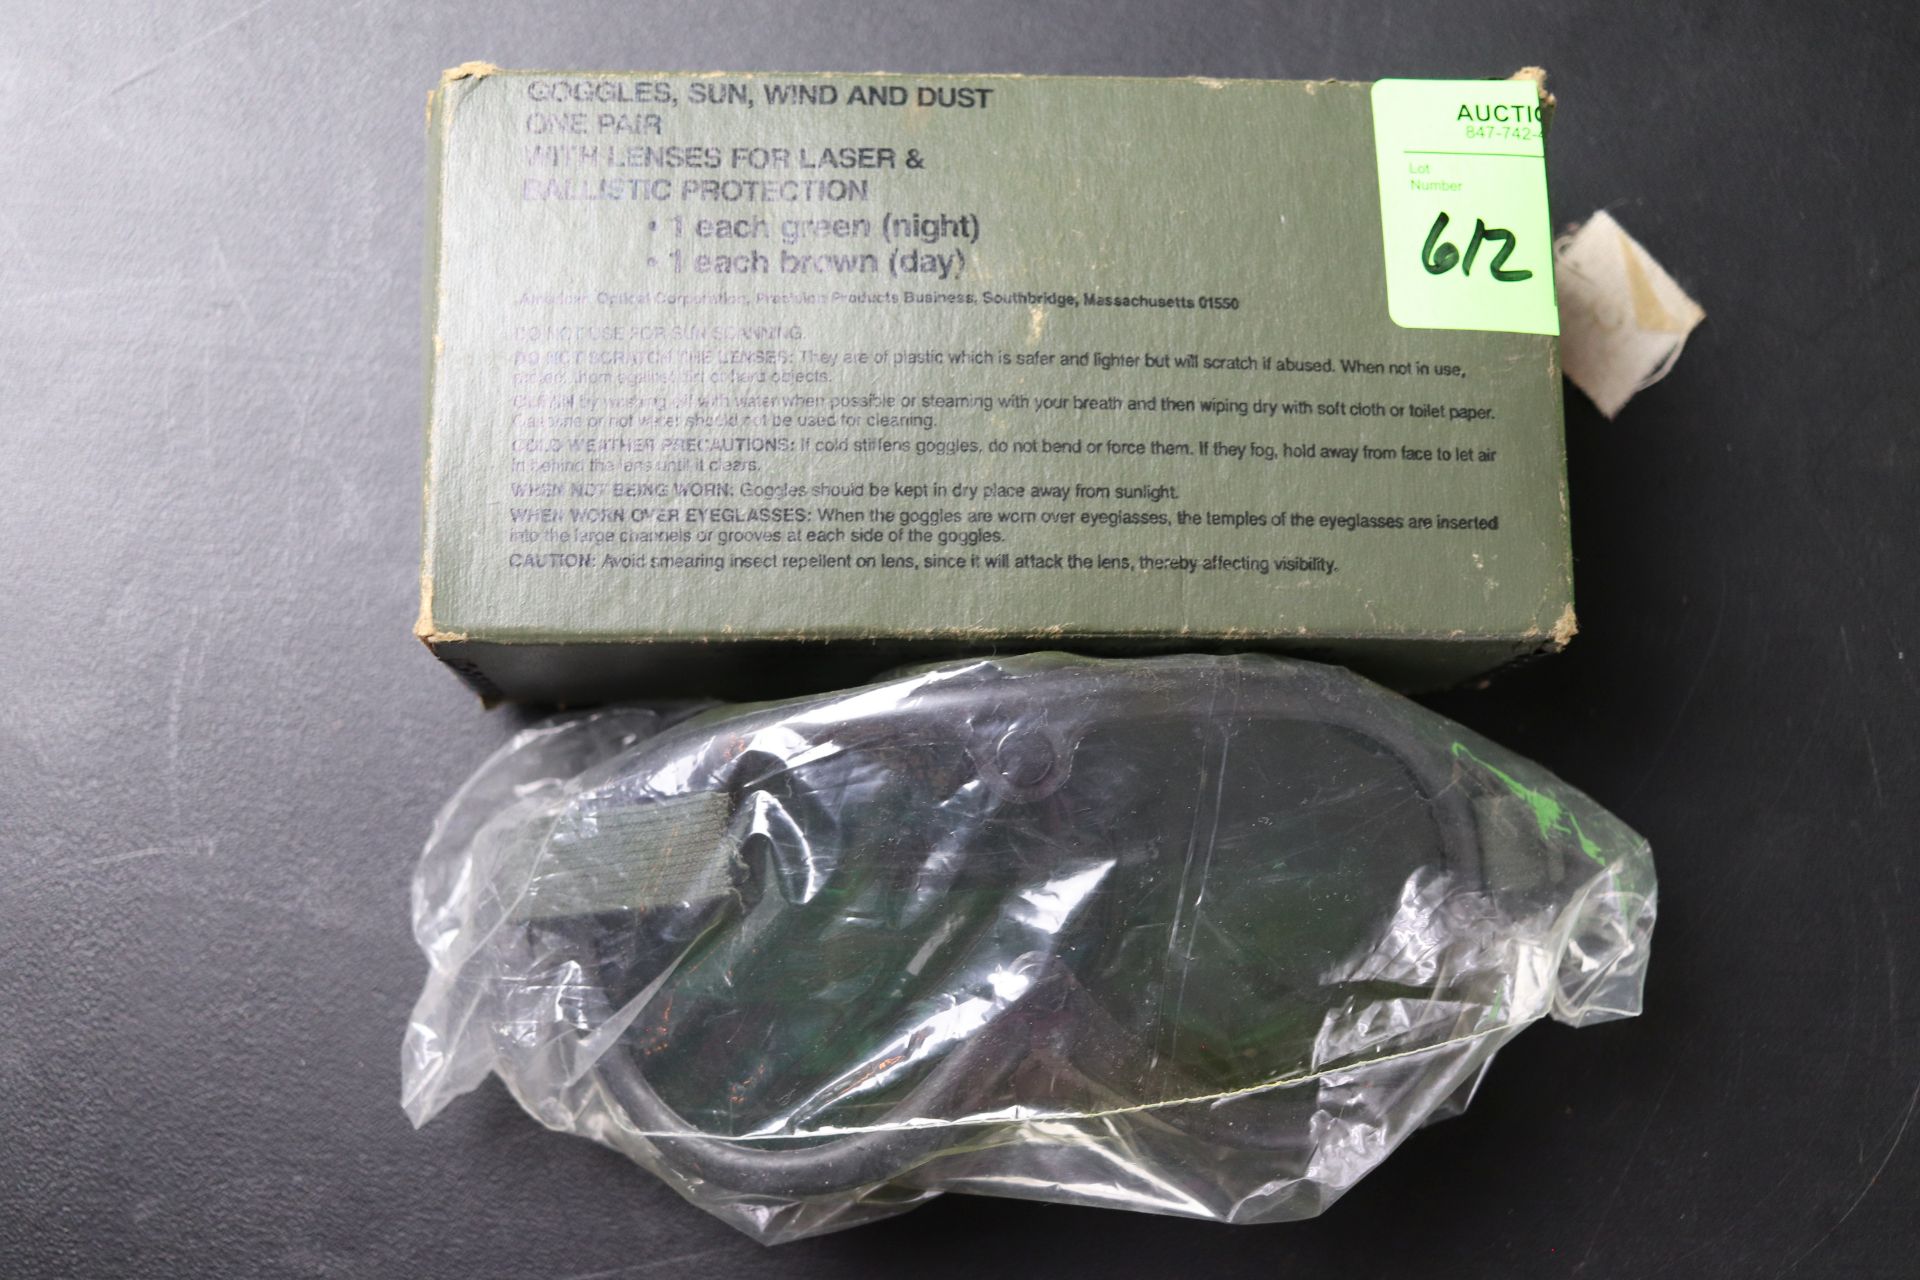 LPL goggles with box, instructions and lenses